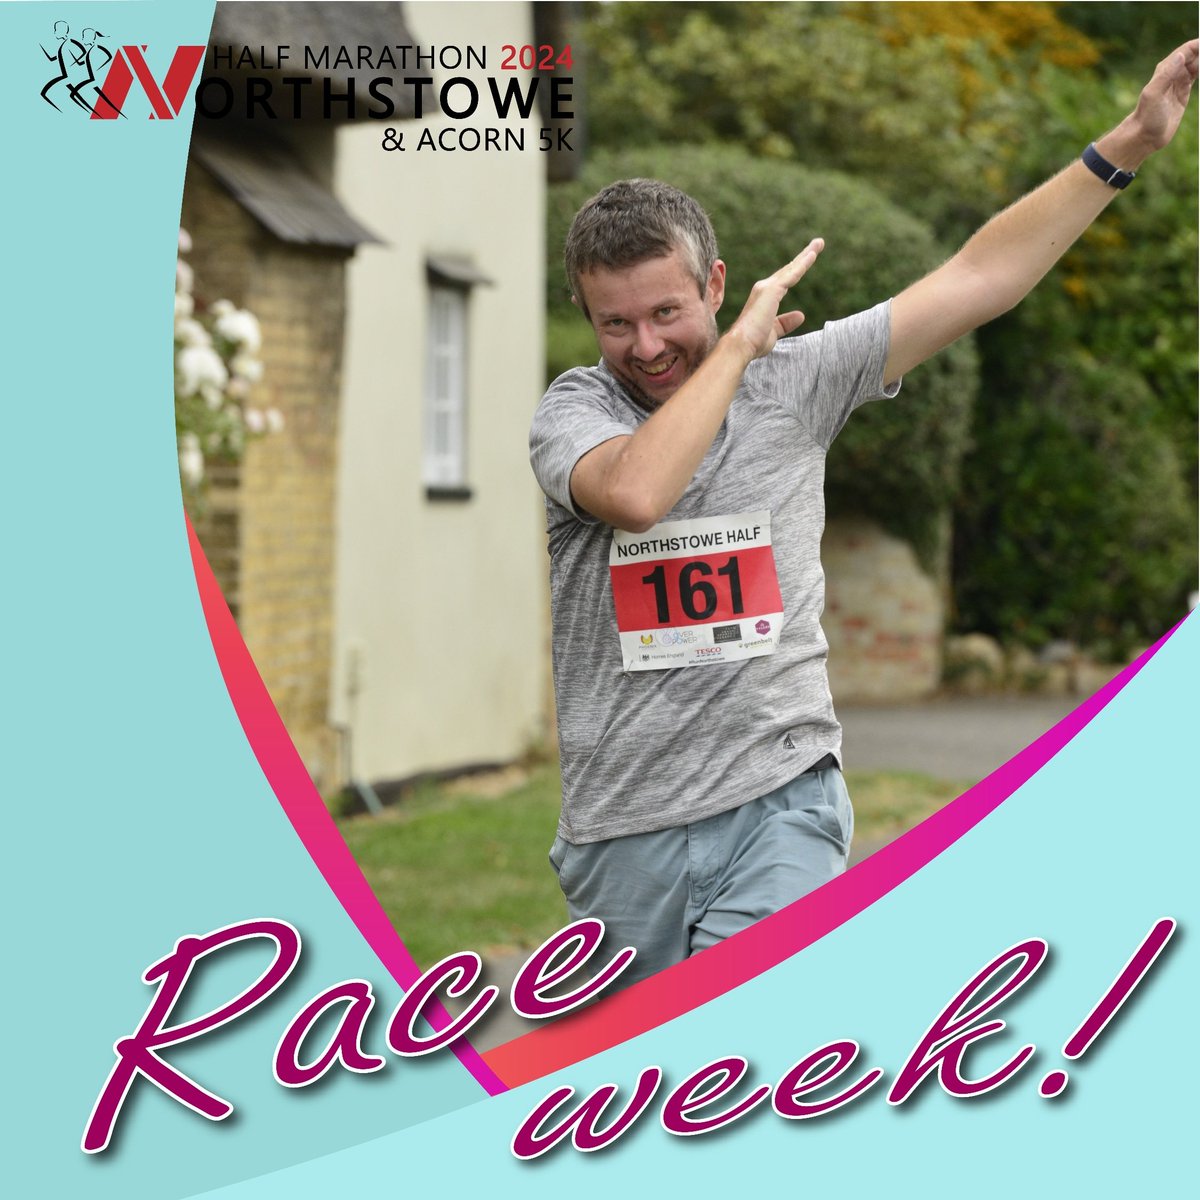 It's RACE WEEK 🏃🏽‍♀️🏃‍♂️💥 The wait is almost over, and the excitement is building up 🙆‍♂️ Make sure to read the event guide ahead of the big day 🧐 If you haven't signed up yet, you have time until Wednesday to join us 🏃🏽‍♀️🏃‍♂️ 👉 northstowehalf.co.uk #northstowe #northstowehalf